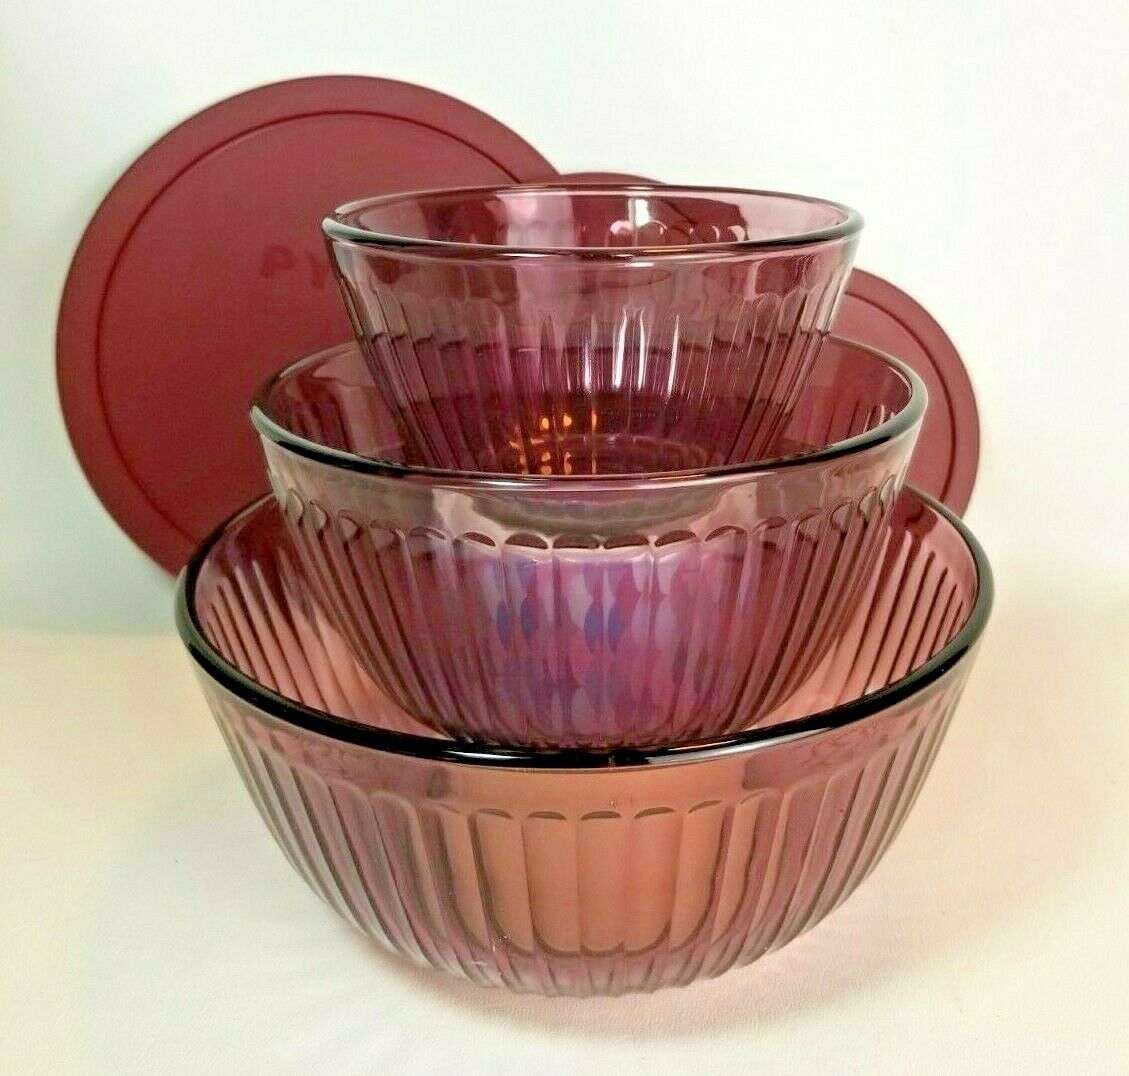 VTG Pyrex Clear Glass Ribbed Mixing Bowl 3 Cup #7401-S Farmhouse Kitchen  USA